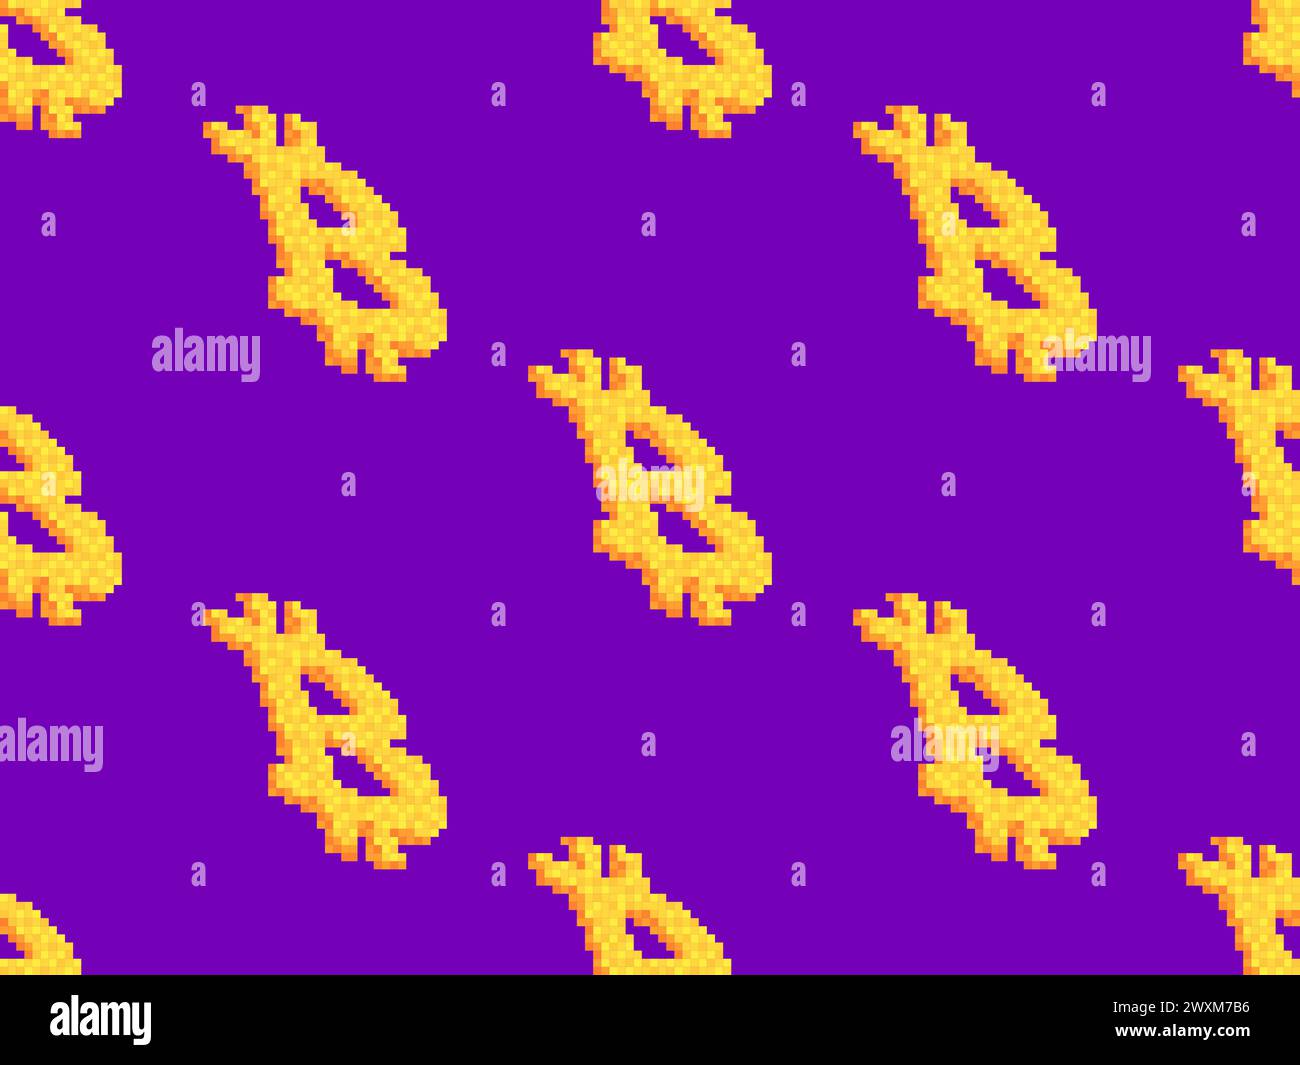 Bitcoin symbol in pixel style. Seamless pattern with the Bitcoin symbol in the style of 8-bit graphics. Bitcoin cryptocurrency. Design of wallpapers, Stock Vector